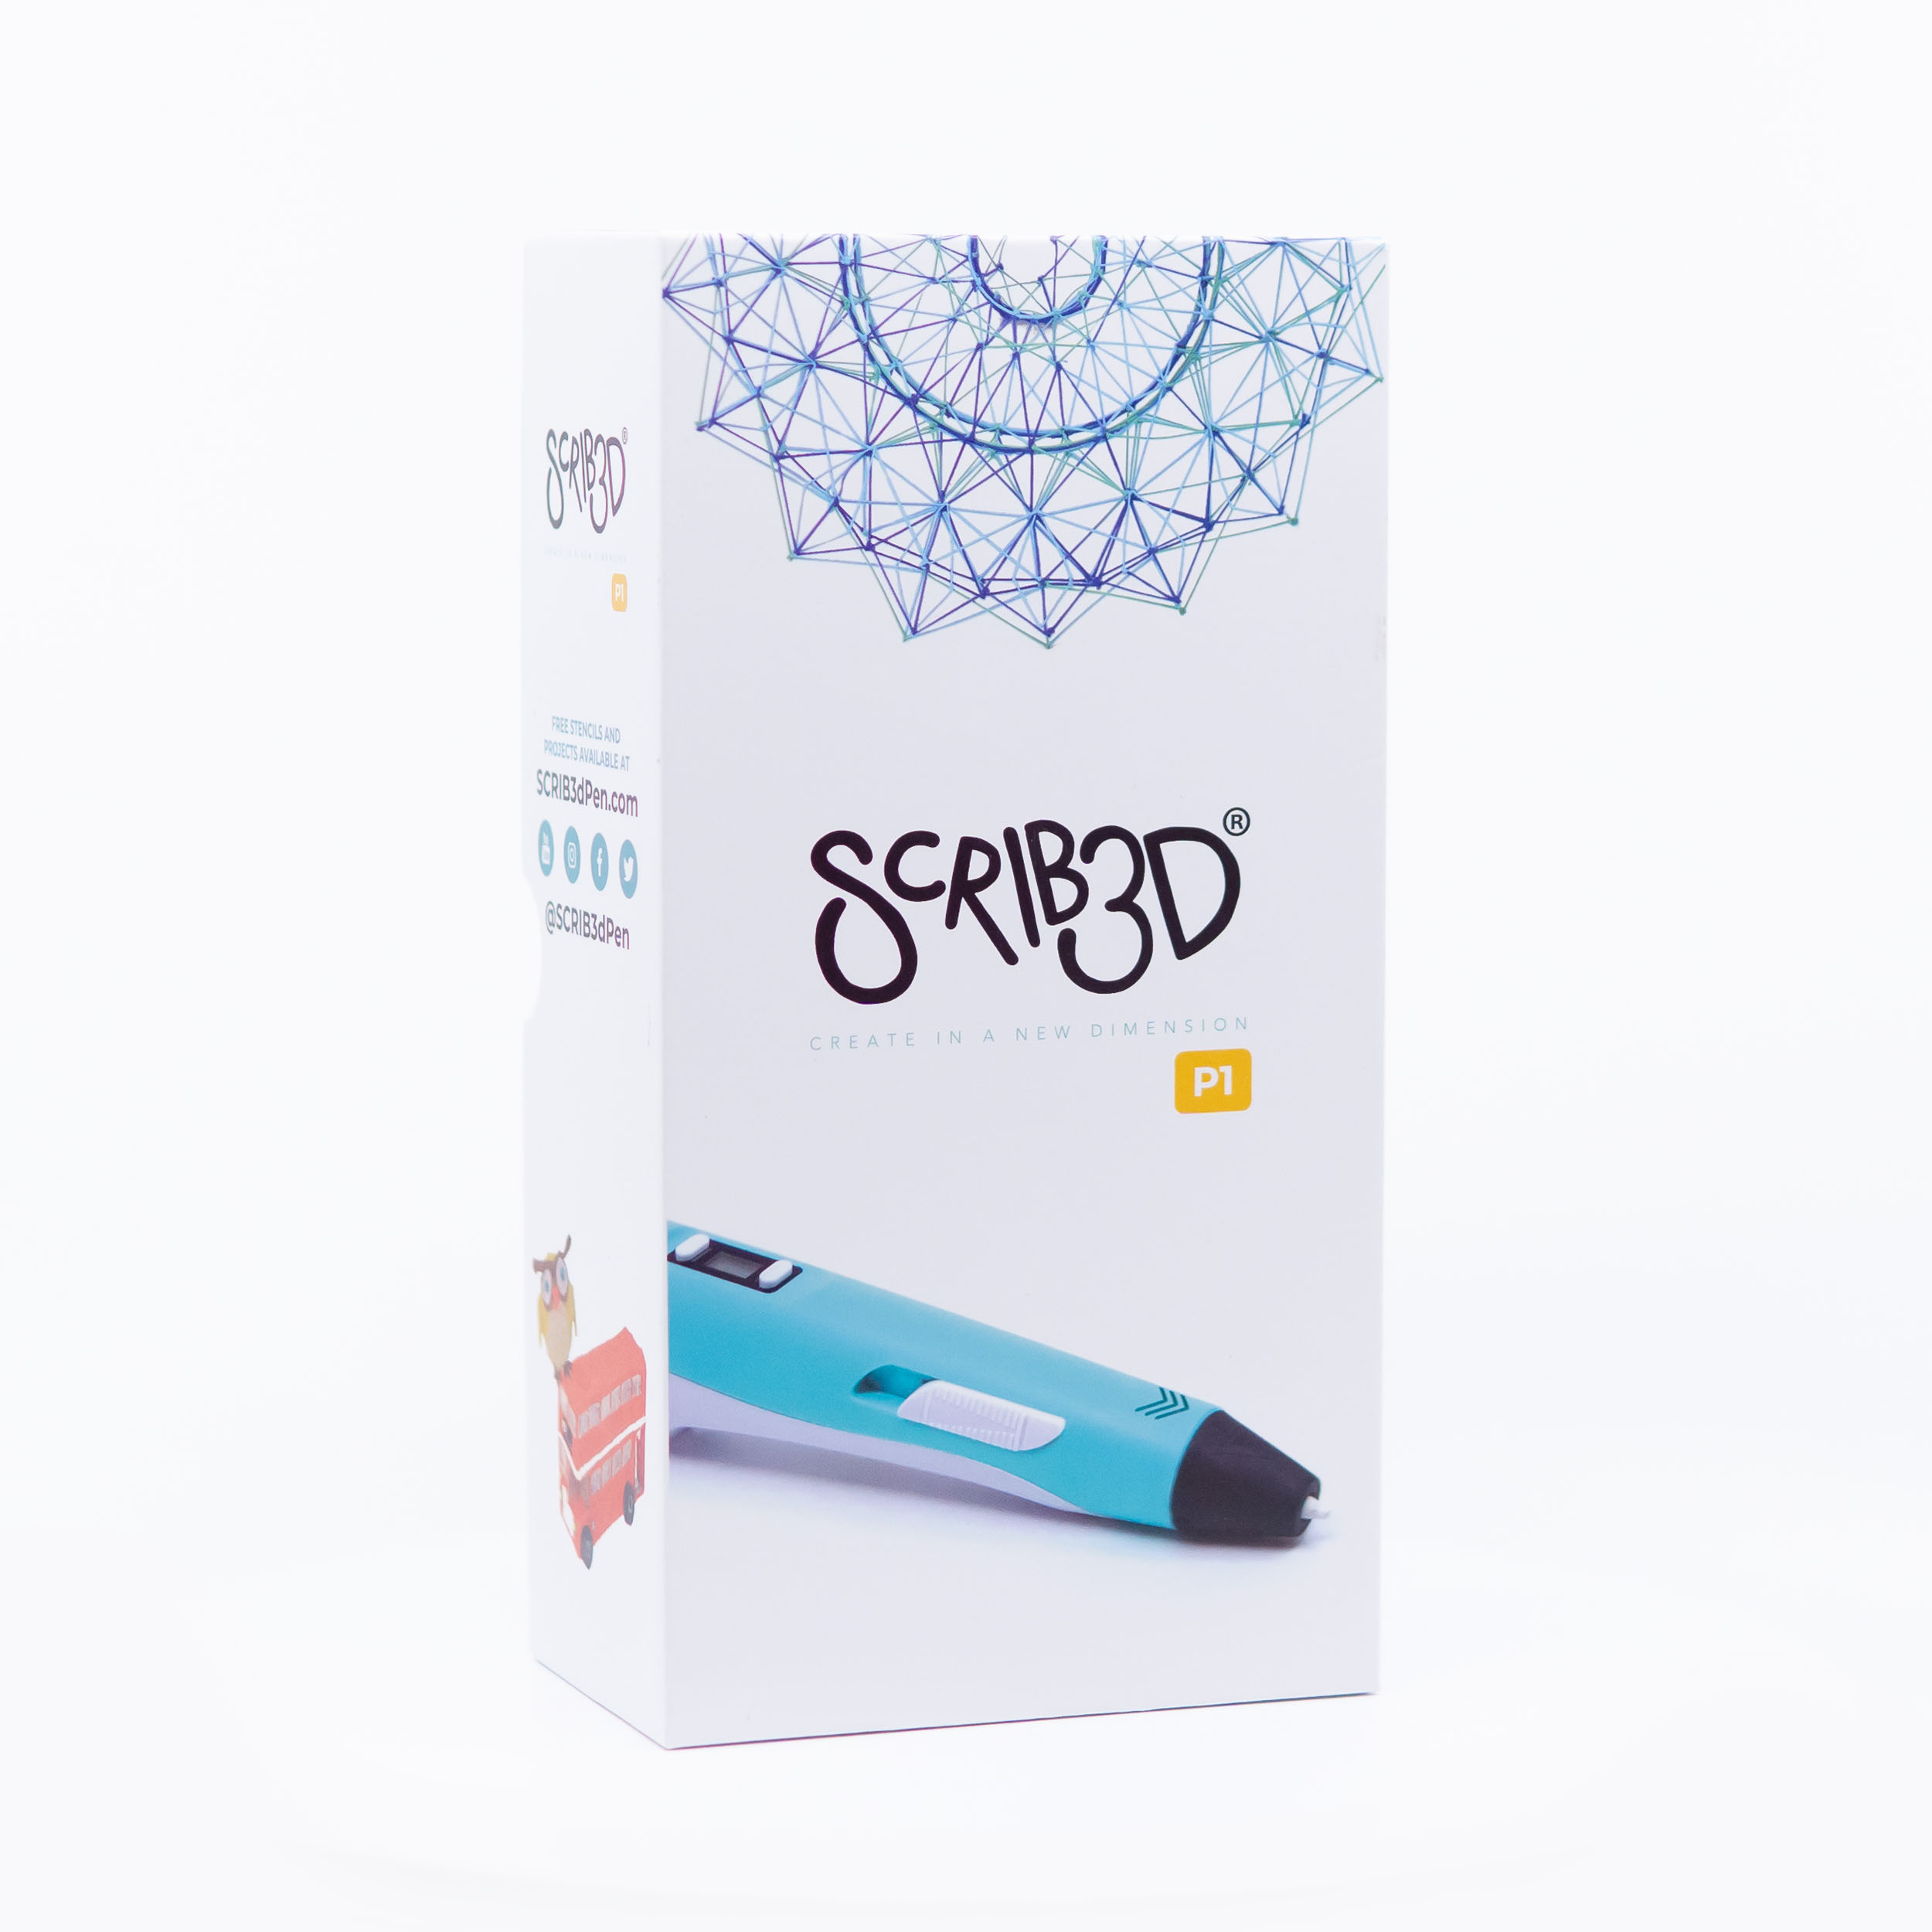 SCRIB3D P1 3D Printing Pen with Display - Includes 3D Pen 3 Starter Colors of PLA Filament Stencil Book + Project Guide and Charger